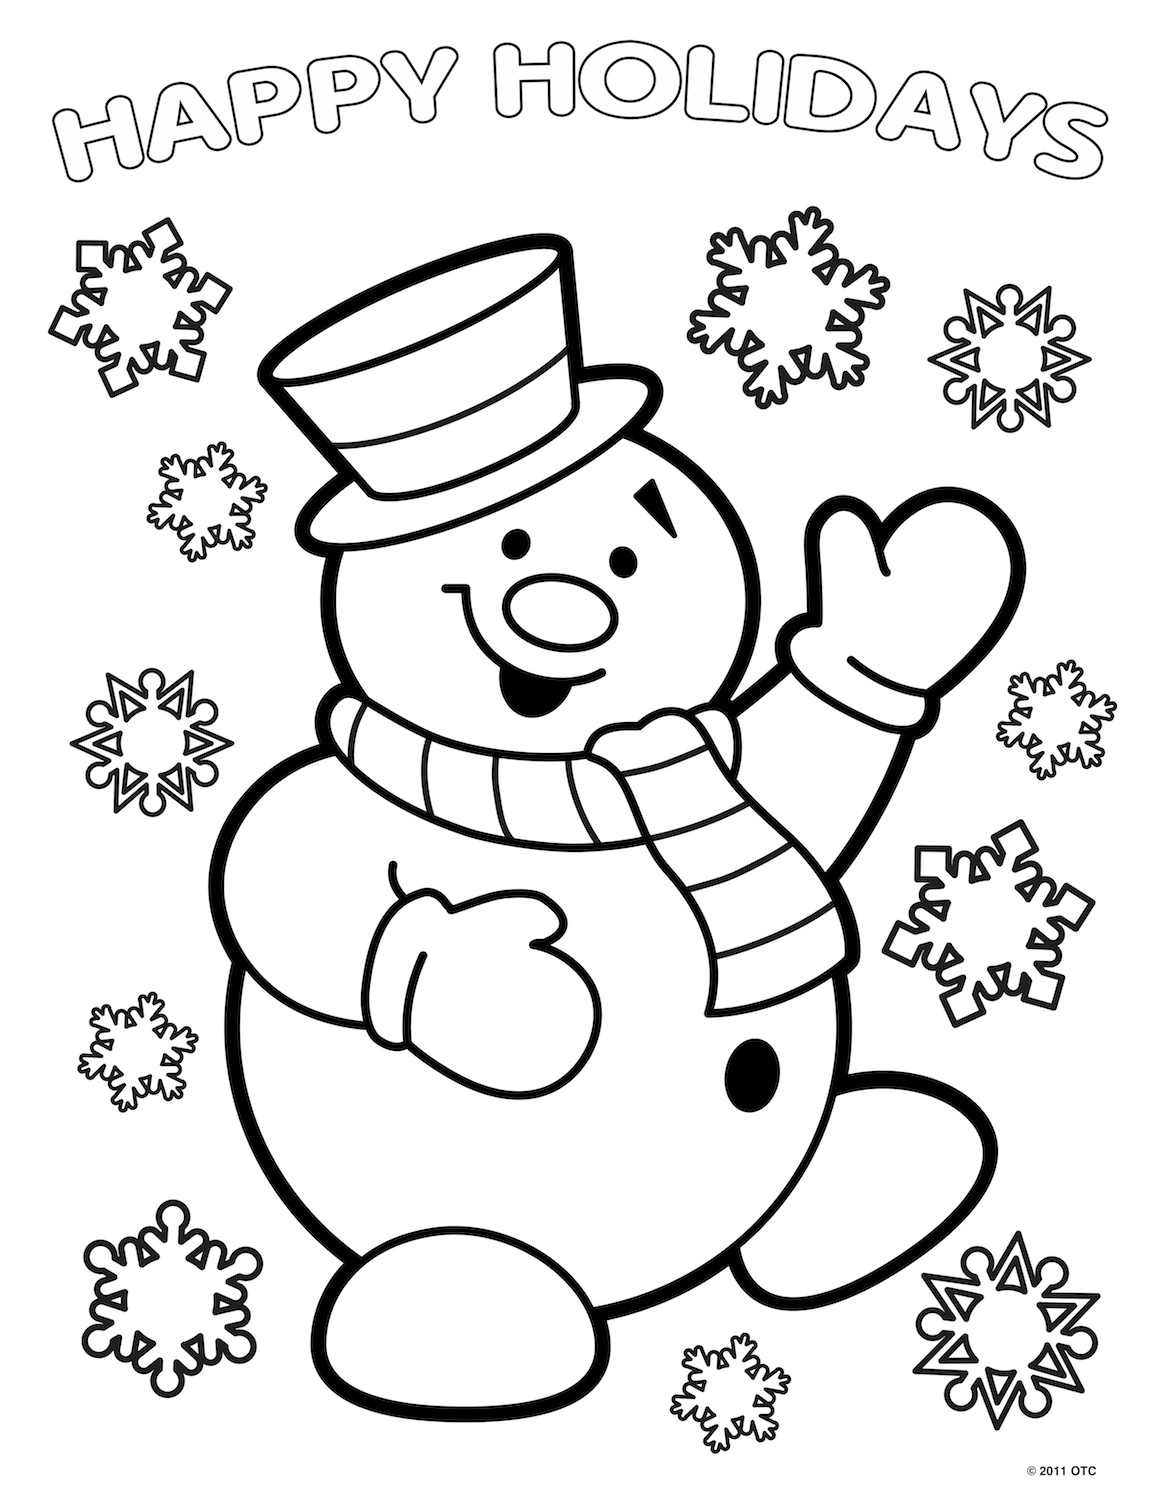 Christmas Coloring Pages Frosty The Snowman at GetDrawings | Free download